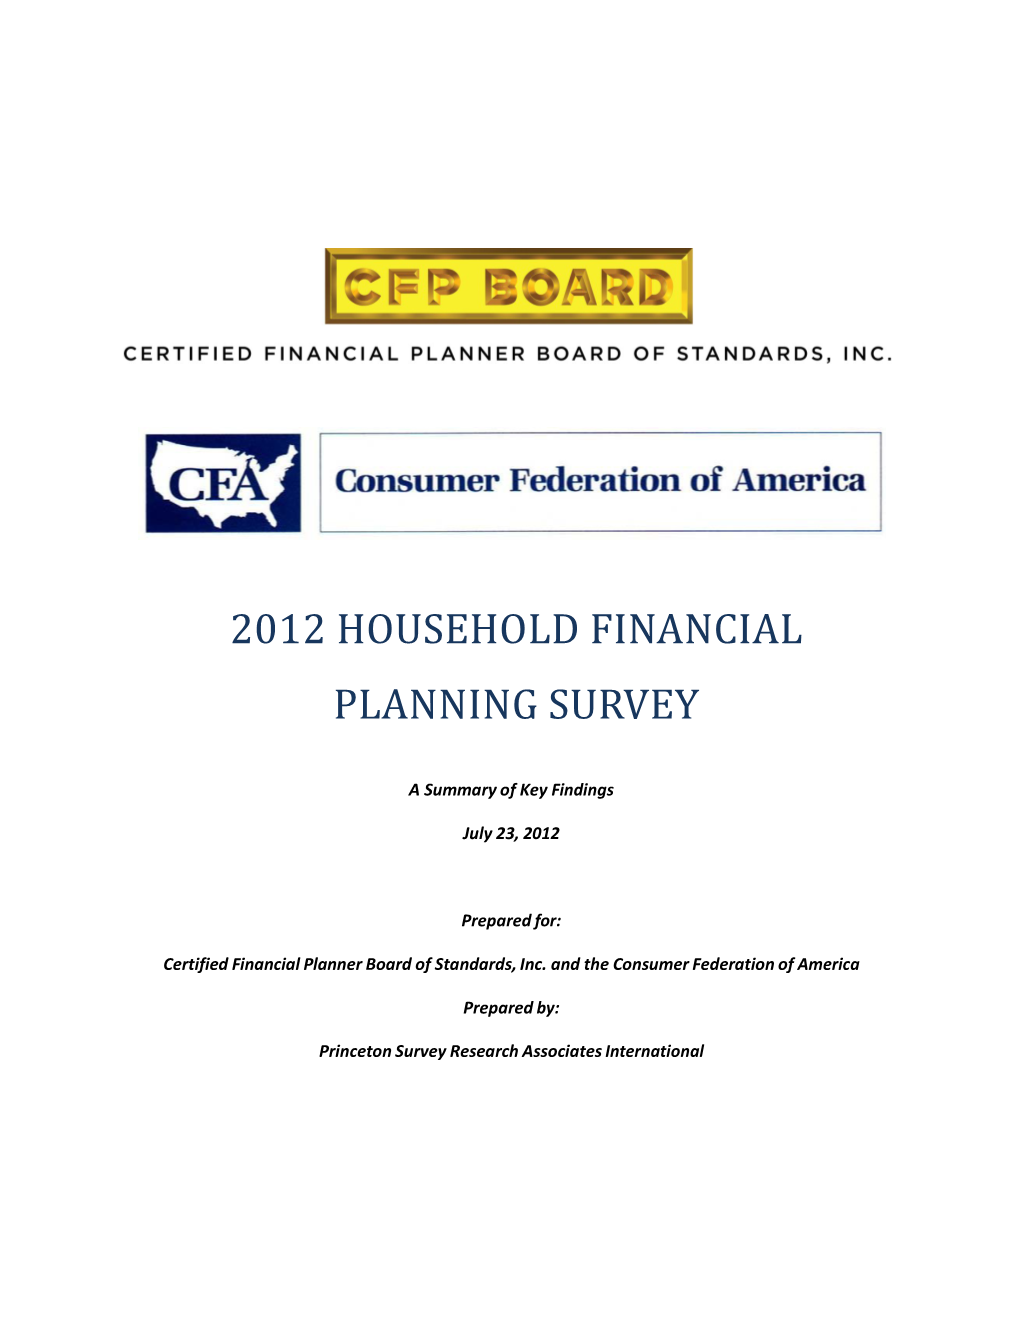 2012 Household Financial Planning Survey